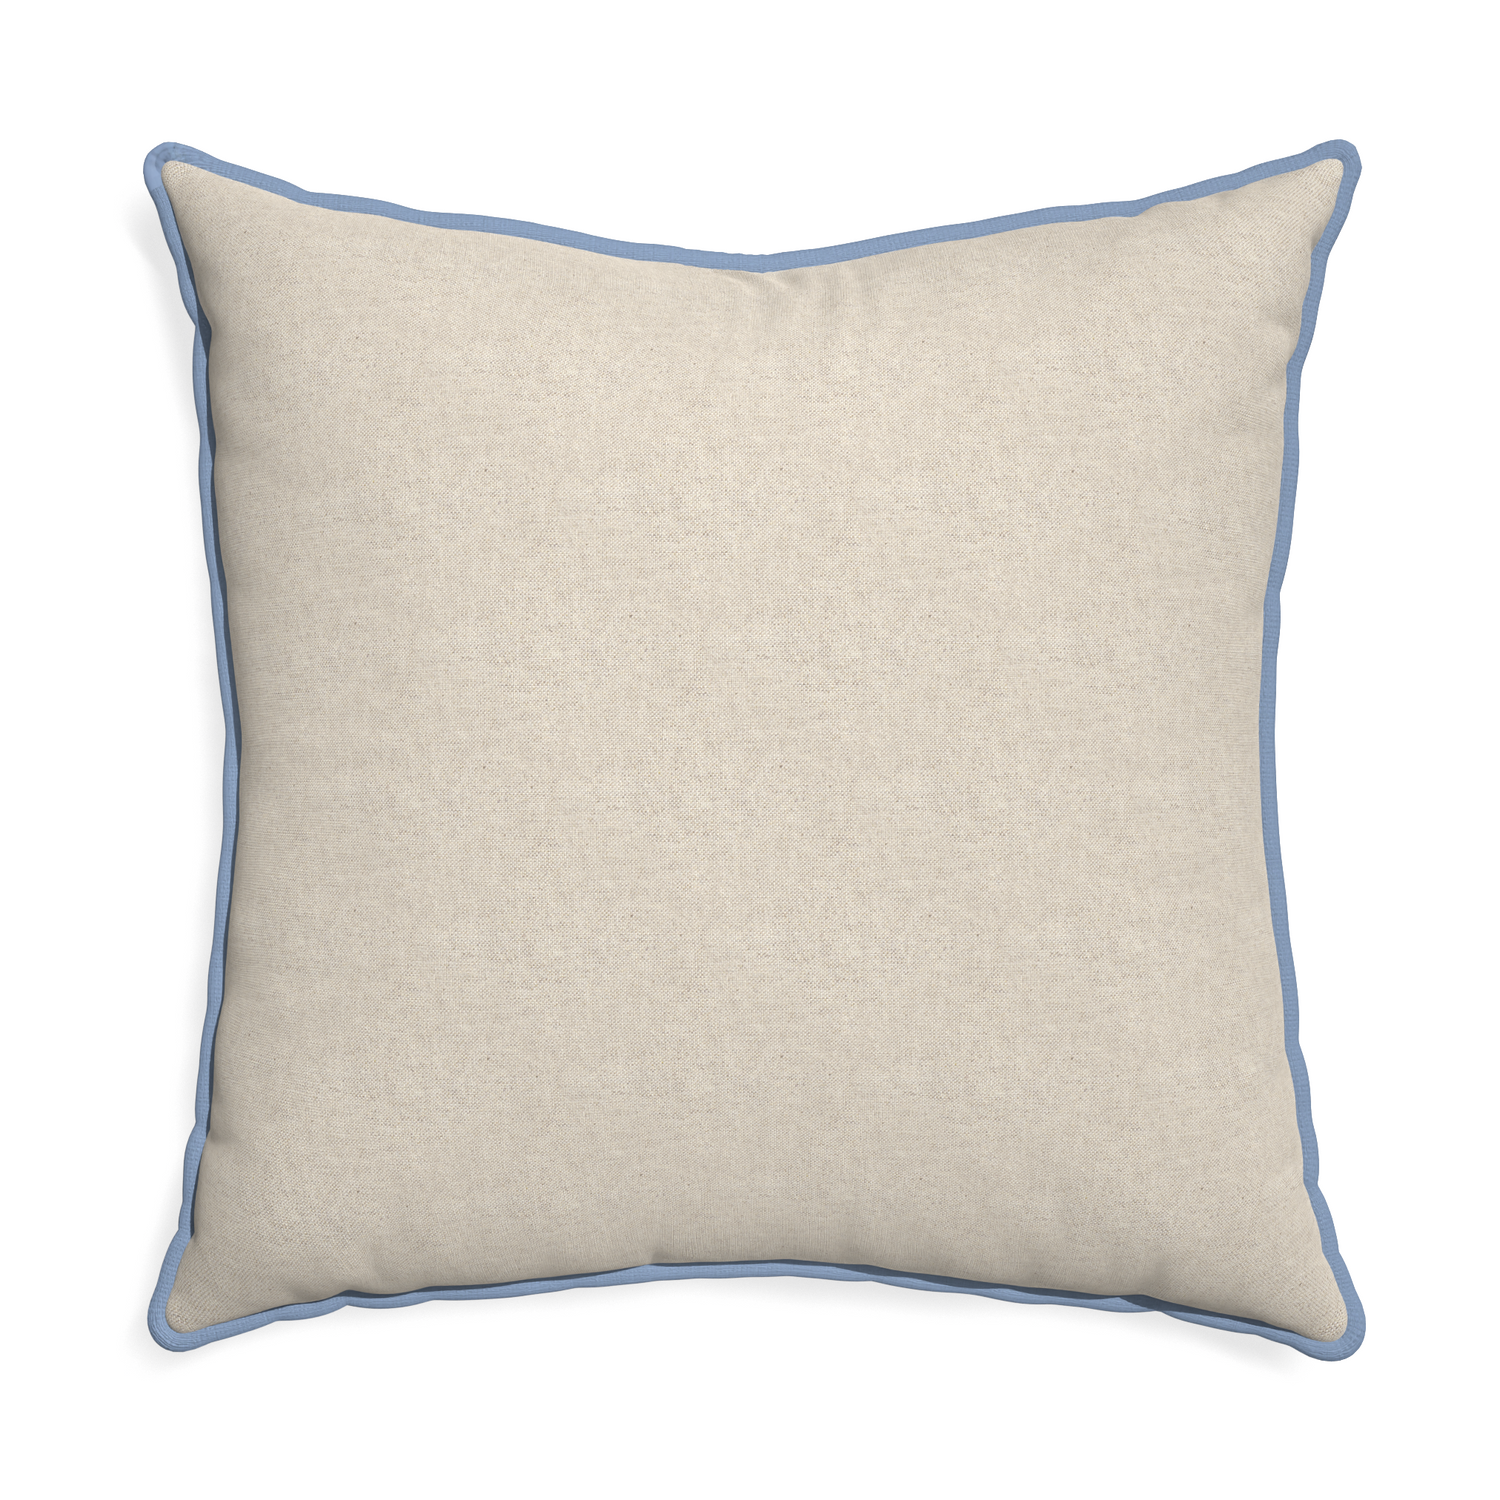 Euro-sham oat custom pillow with sky piping on white background